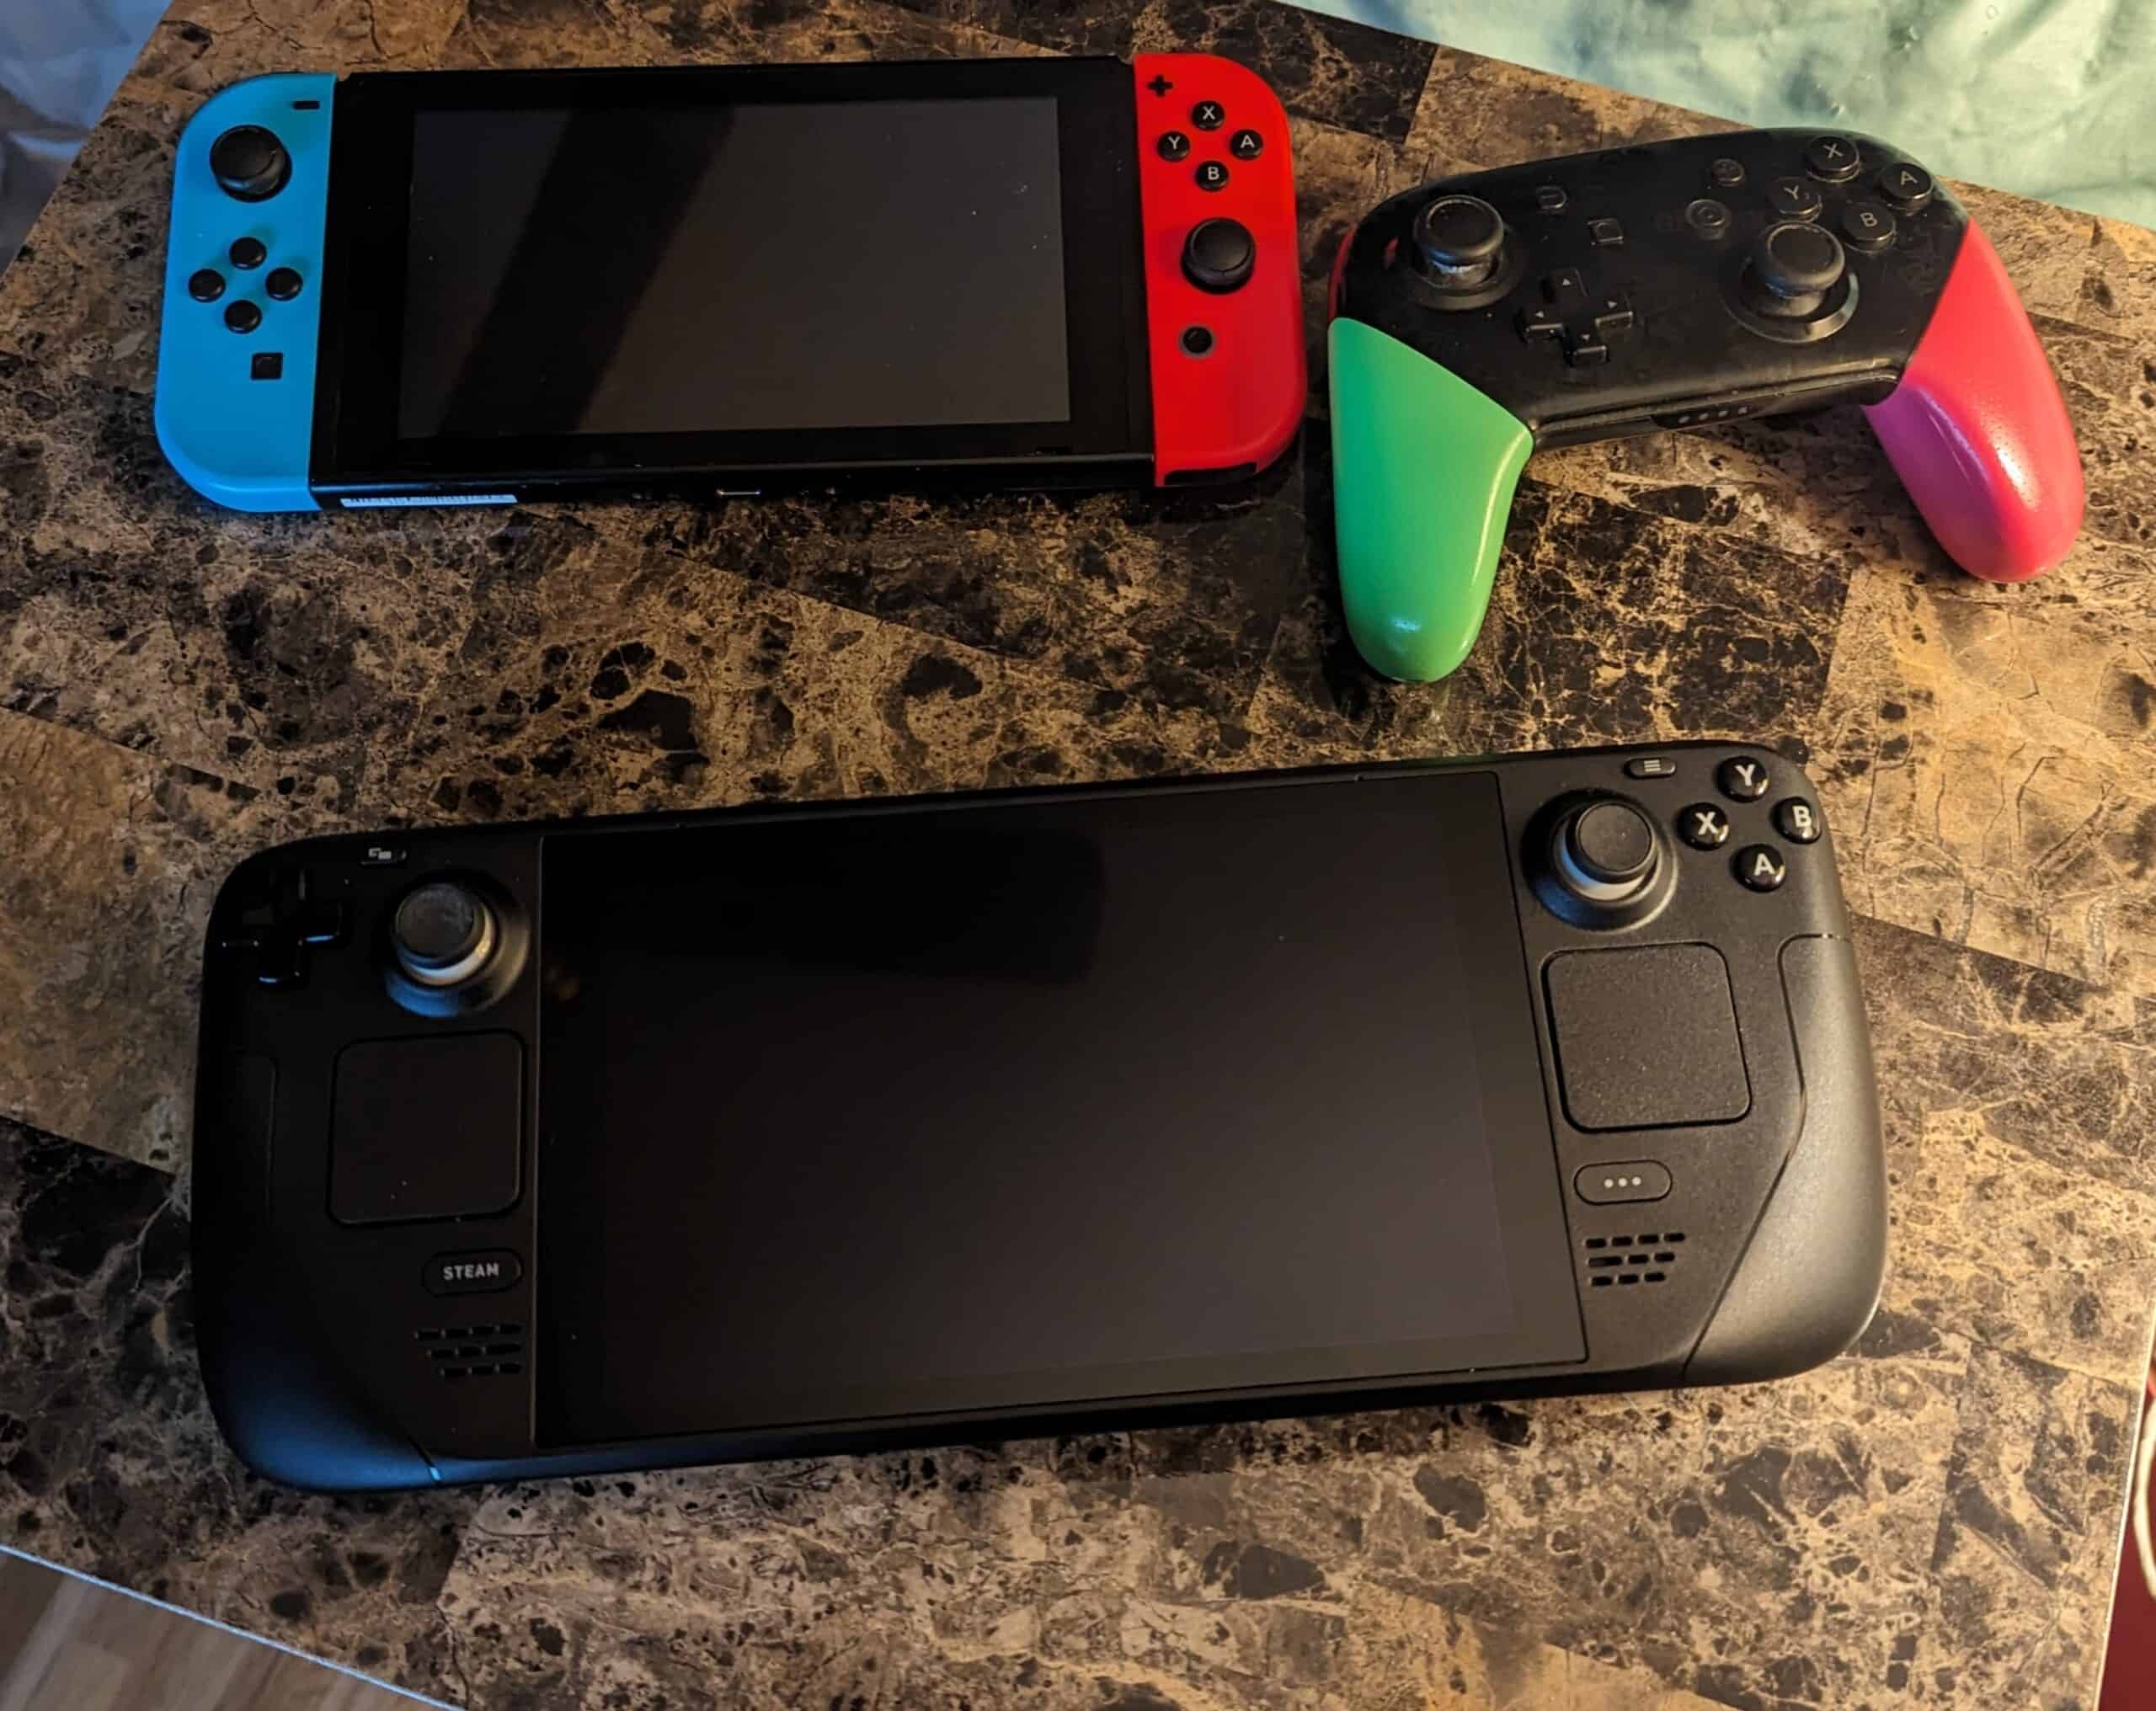 Featured image for the I prefer the Nintendo Switch article. A Nintendo Switch sitting next to a Pro controller and a Steam Deck.